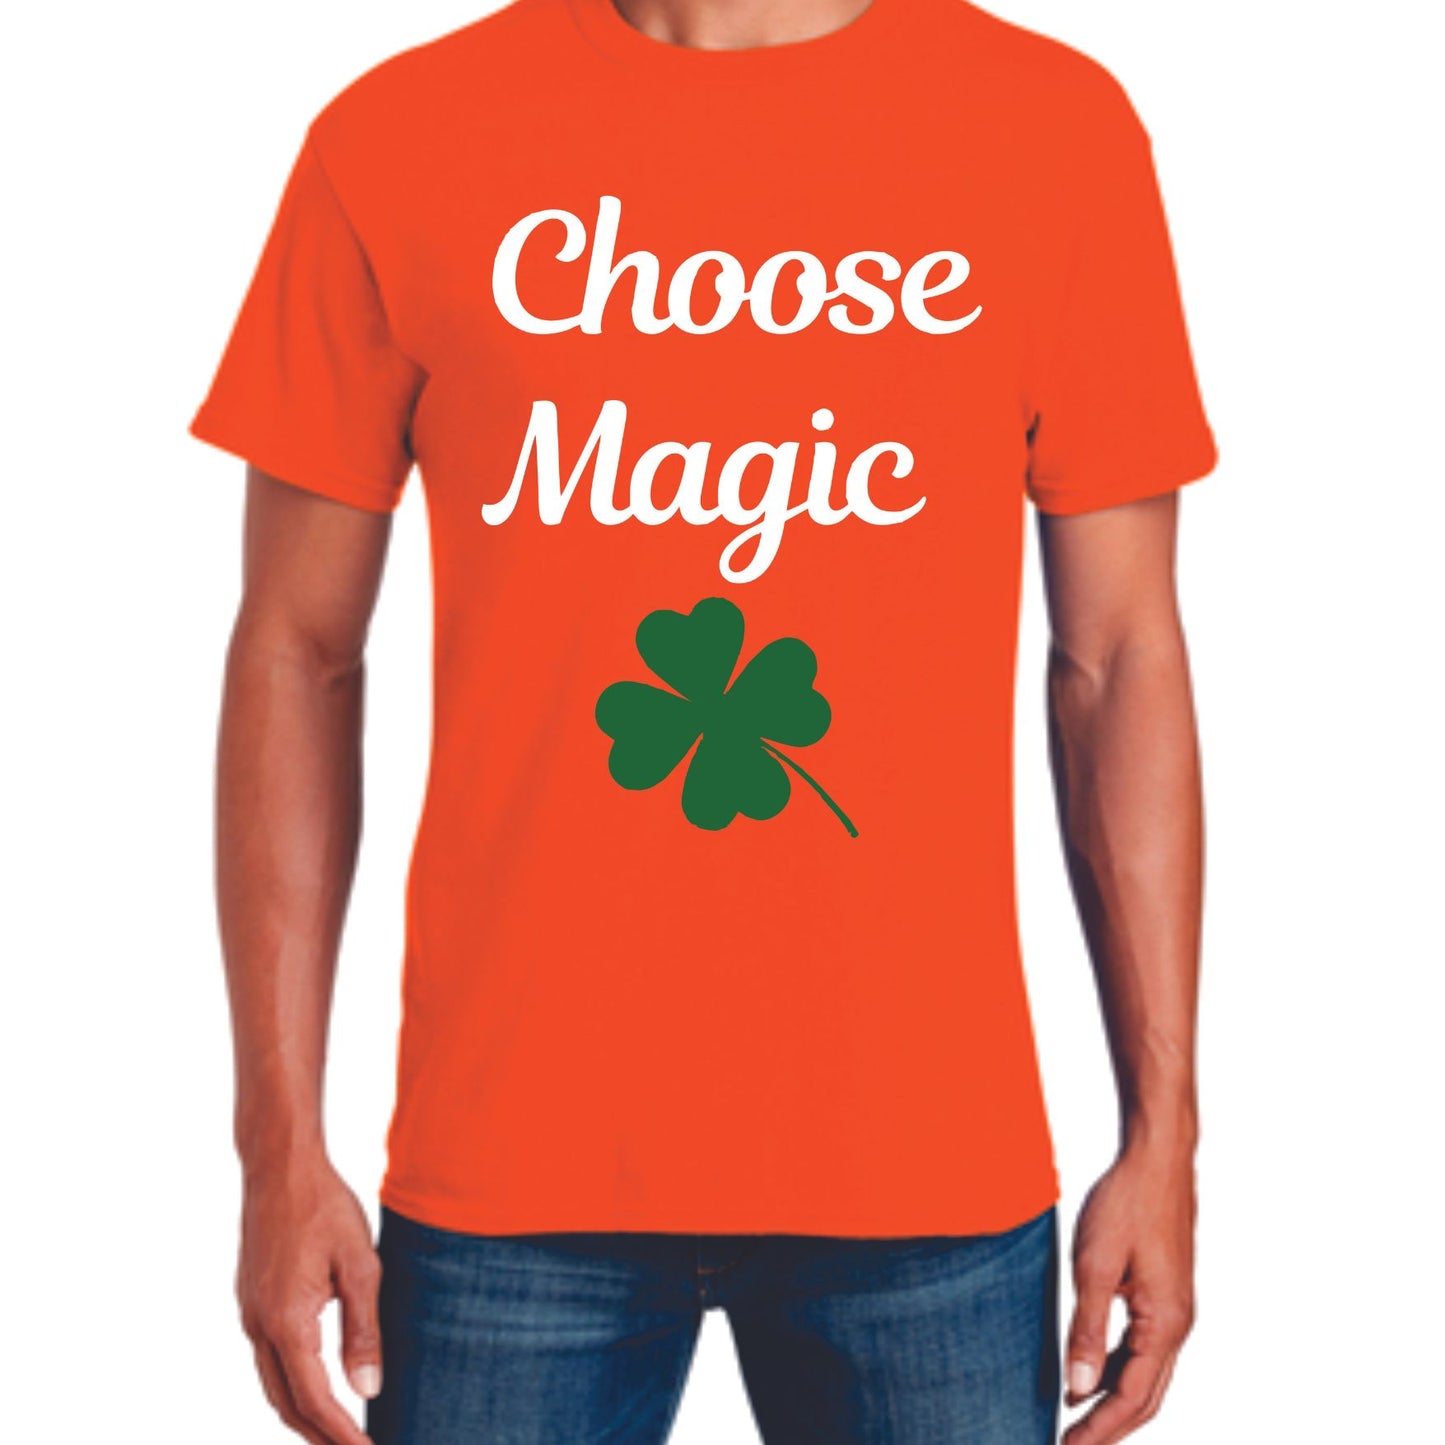 Share the Magic T Shirt Special